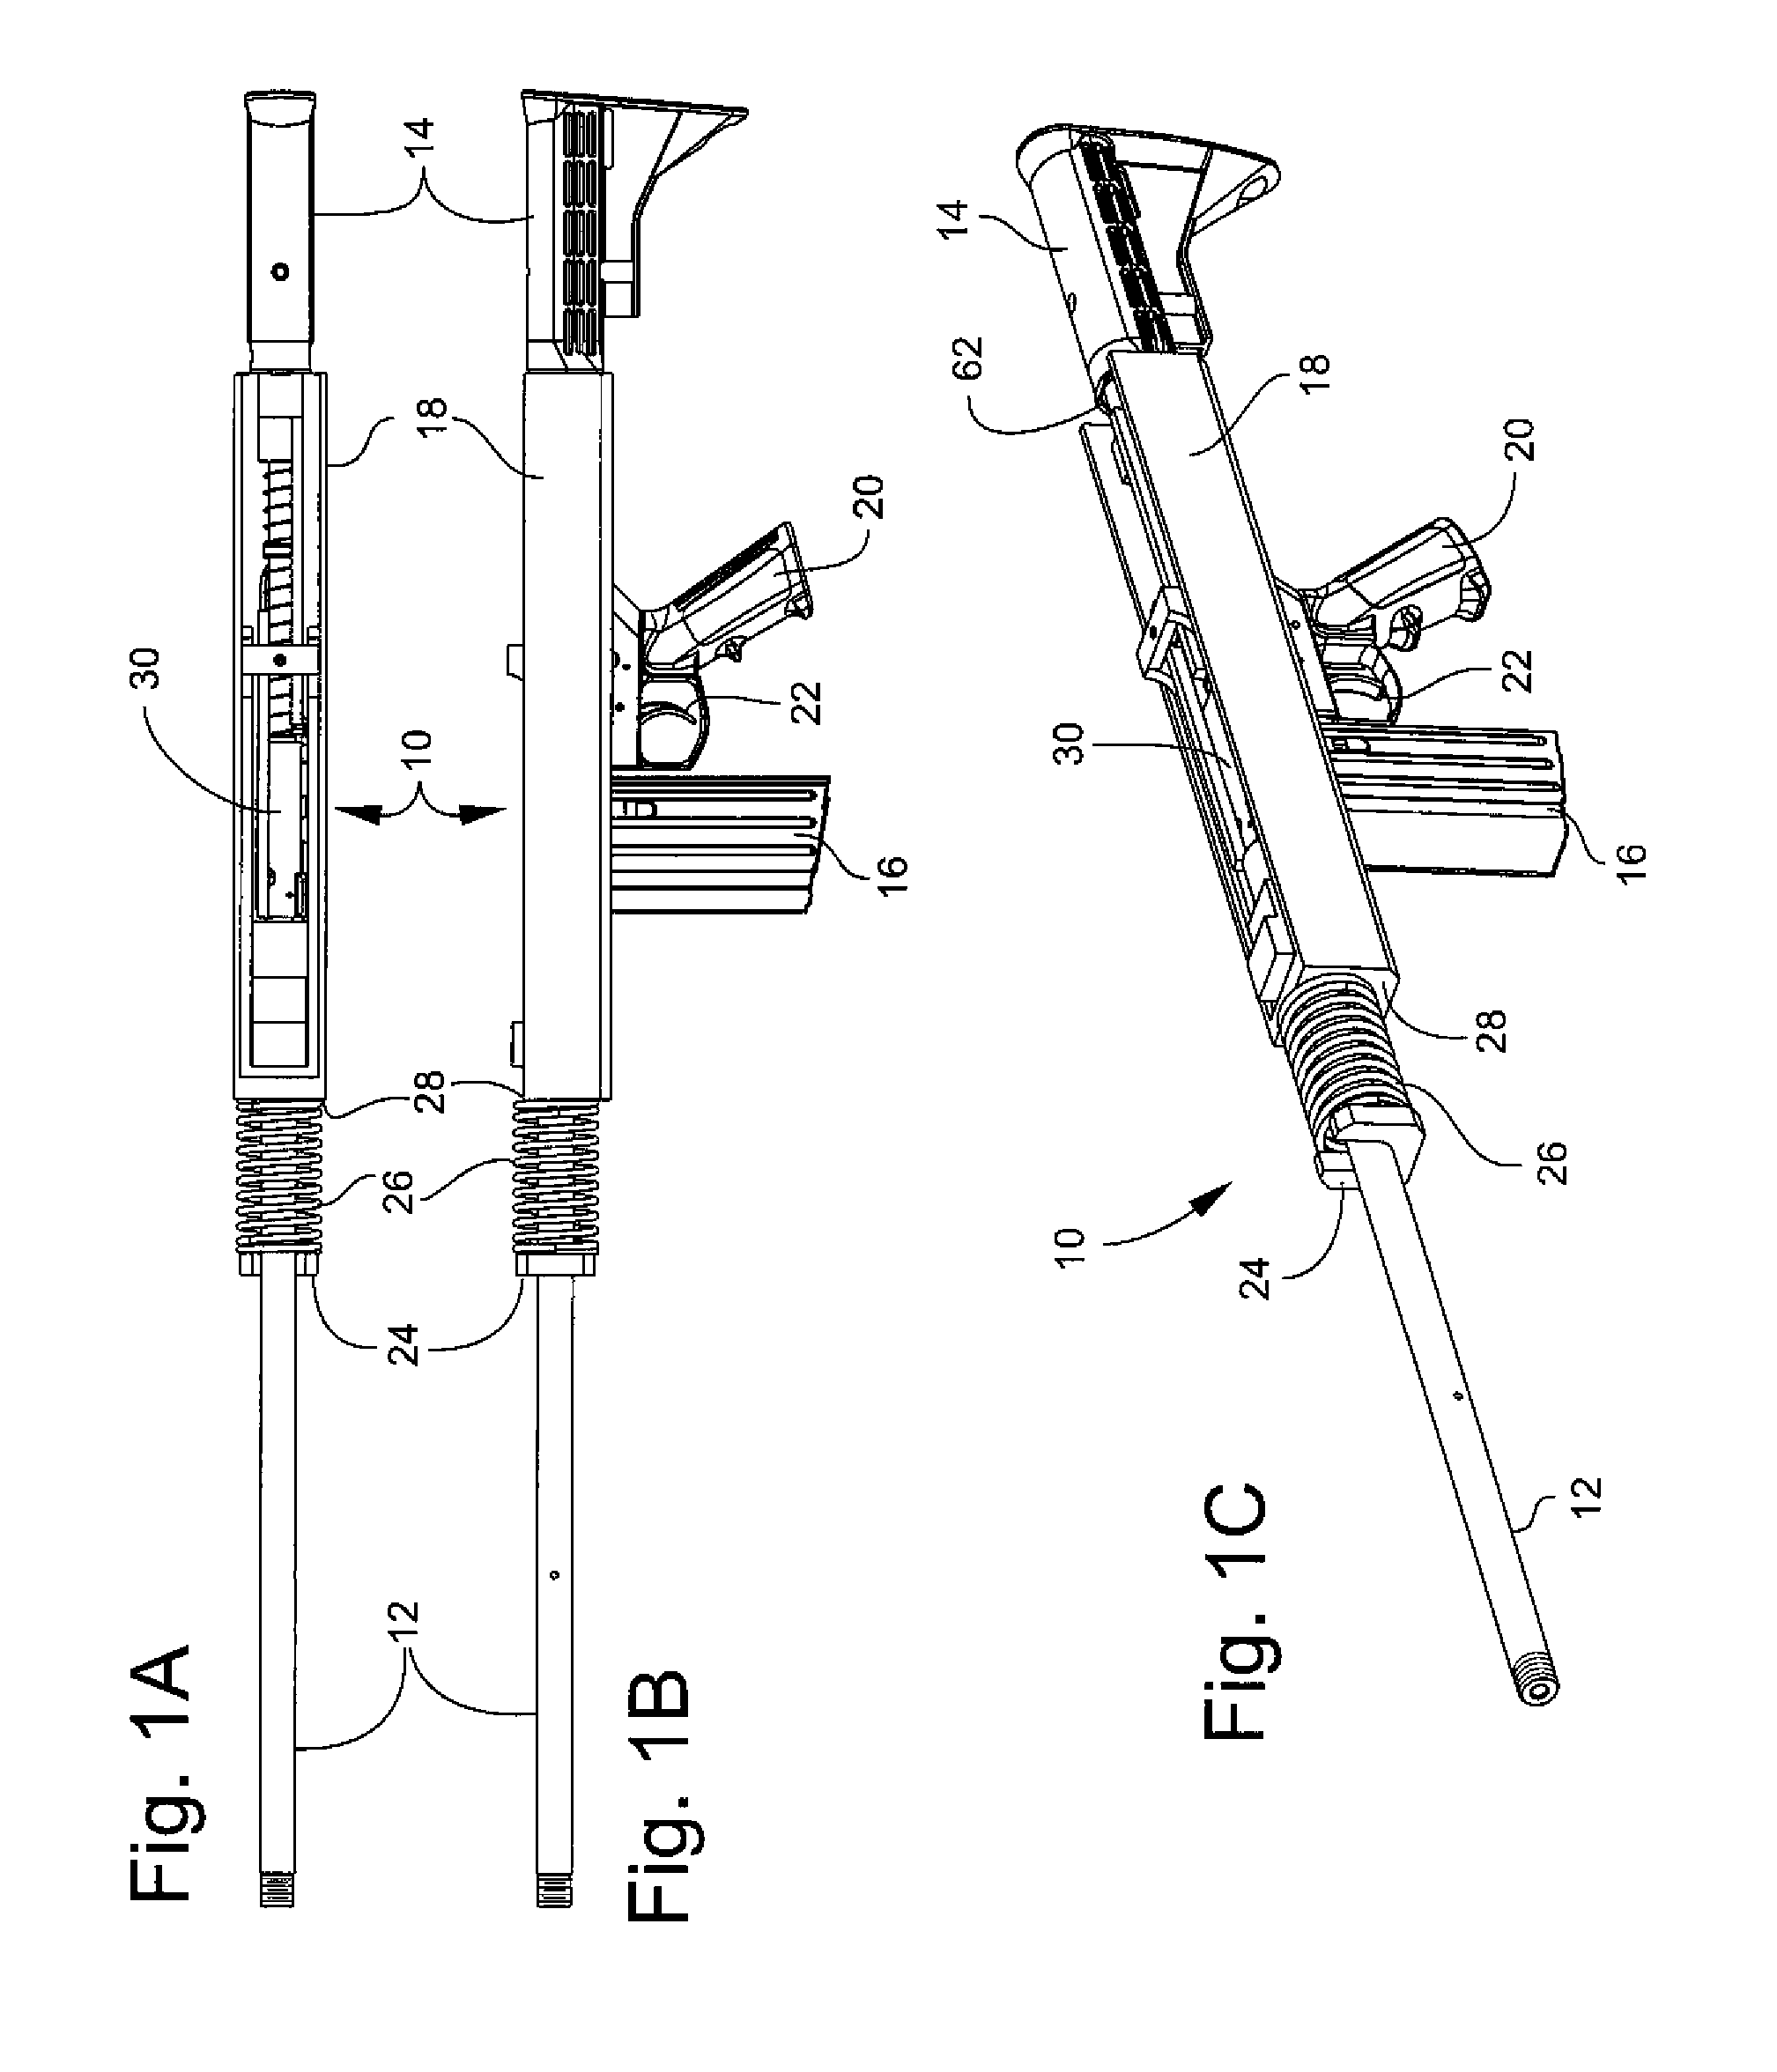 Recoil reduction apparatus and method for weapon